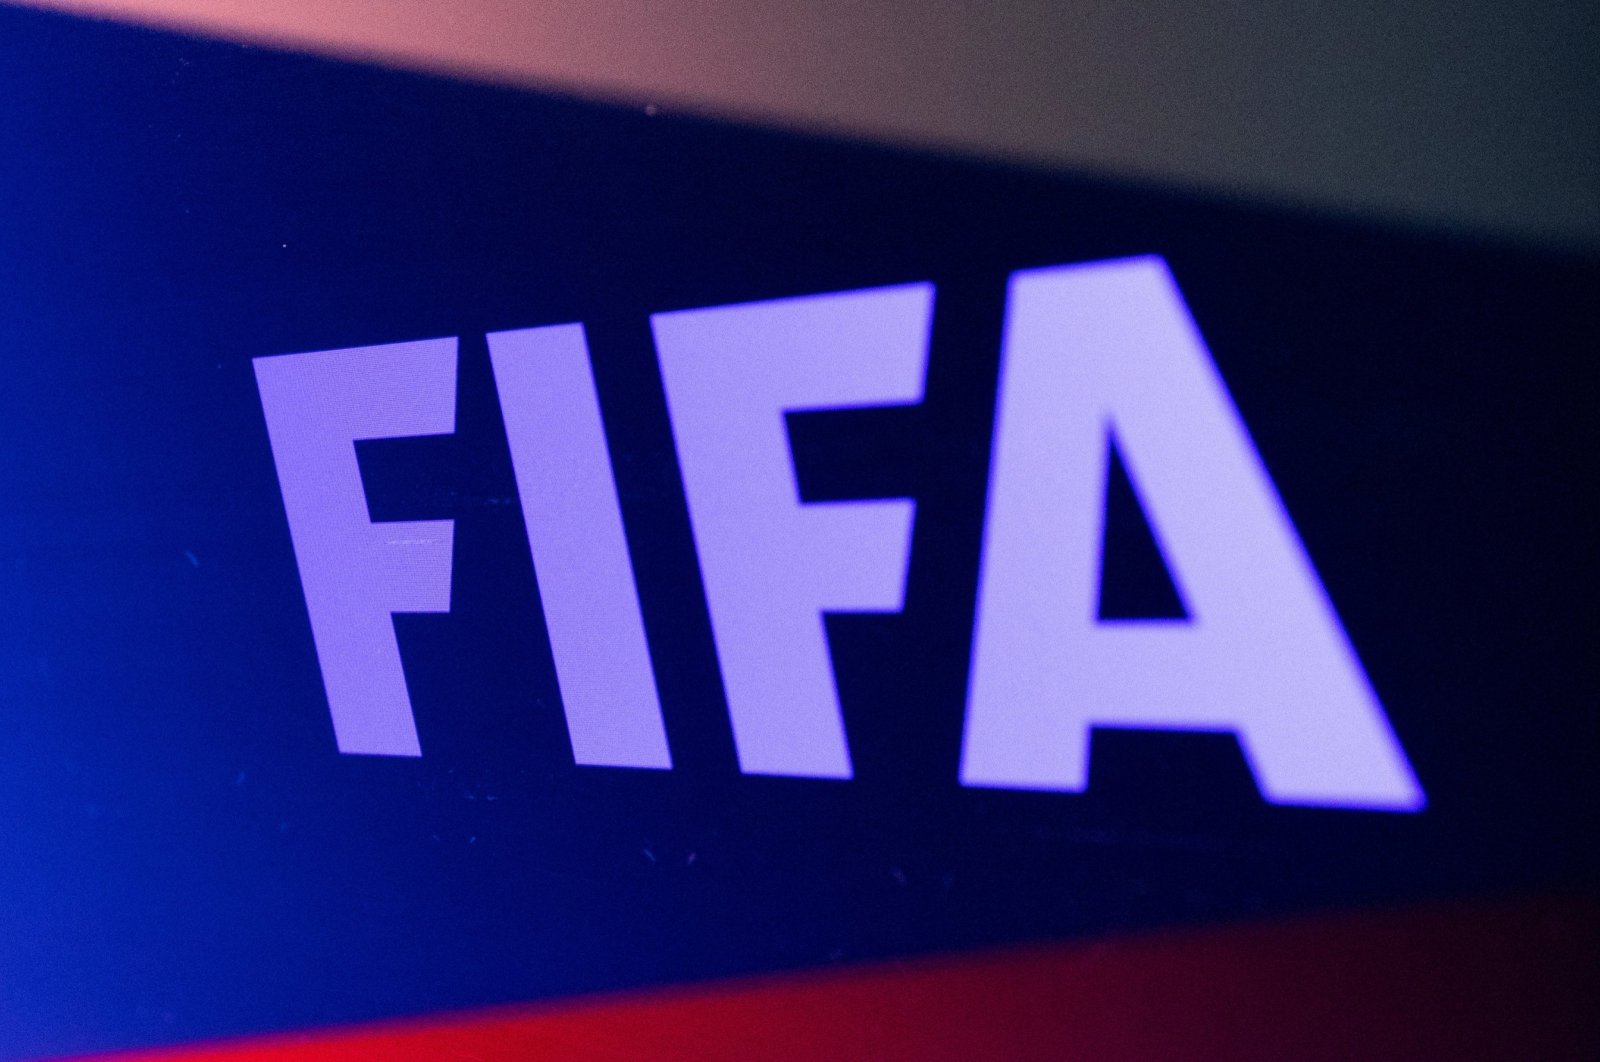 The FIFA logo is seen in front of the Russian flag in this illustration, Feb. 28, 2022. (Reuters Photo)